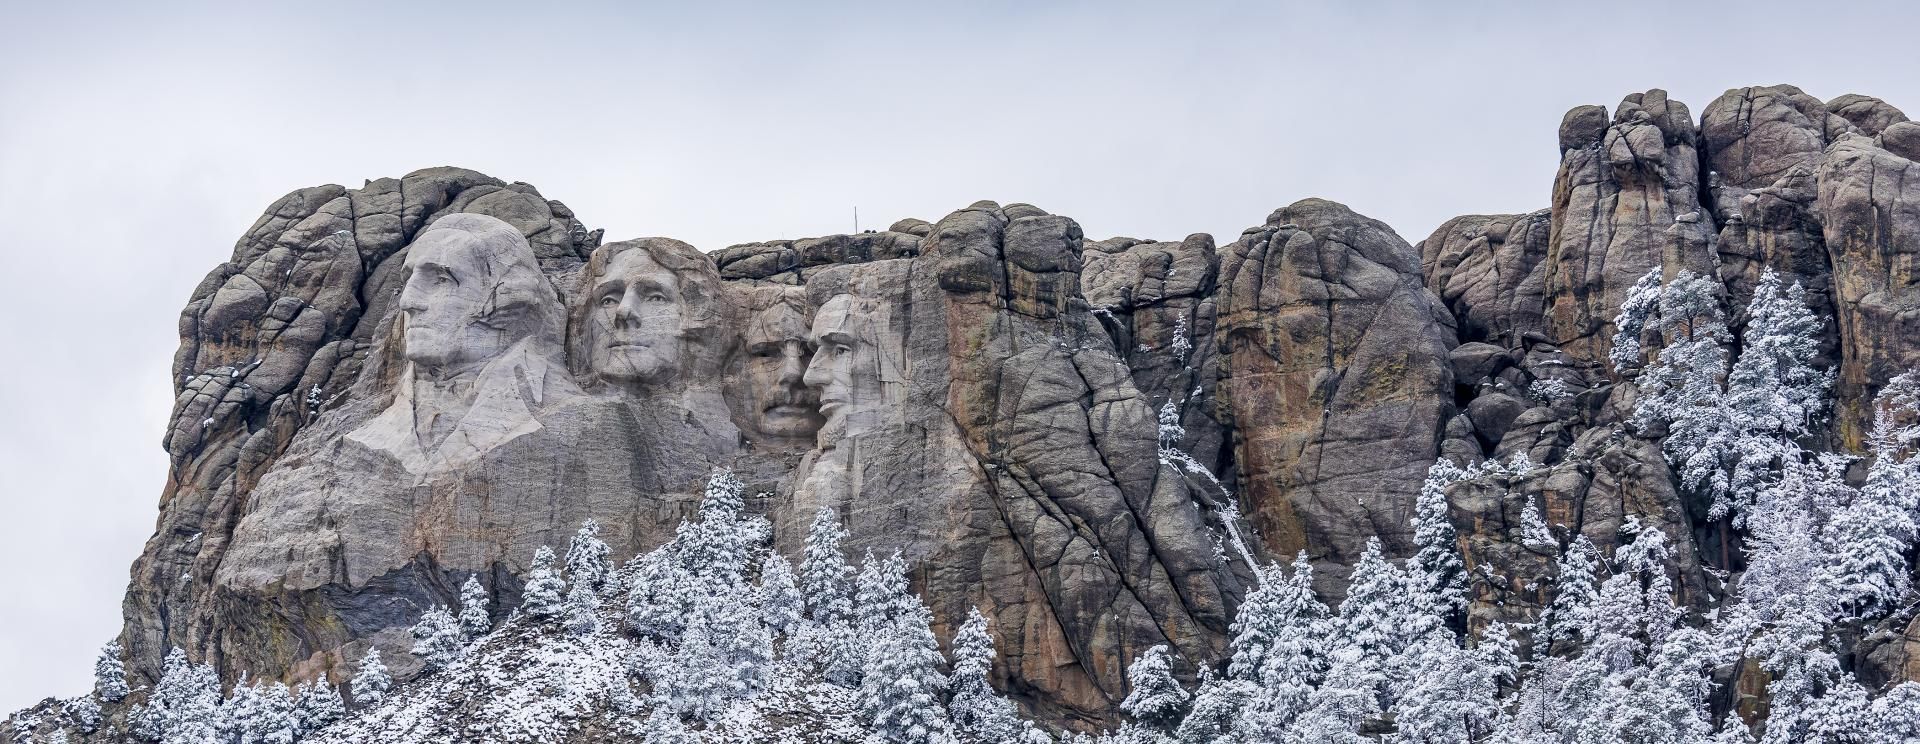 A statue of the presidents of the united states on top of a mountain covered in snow.